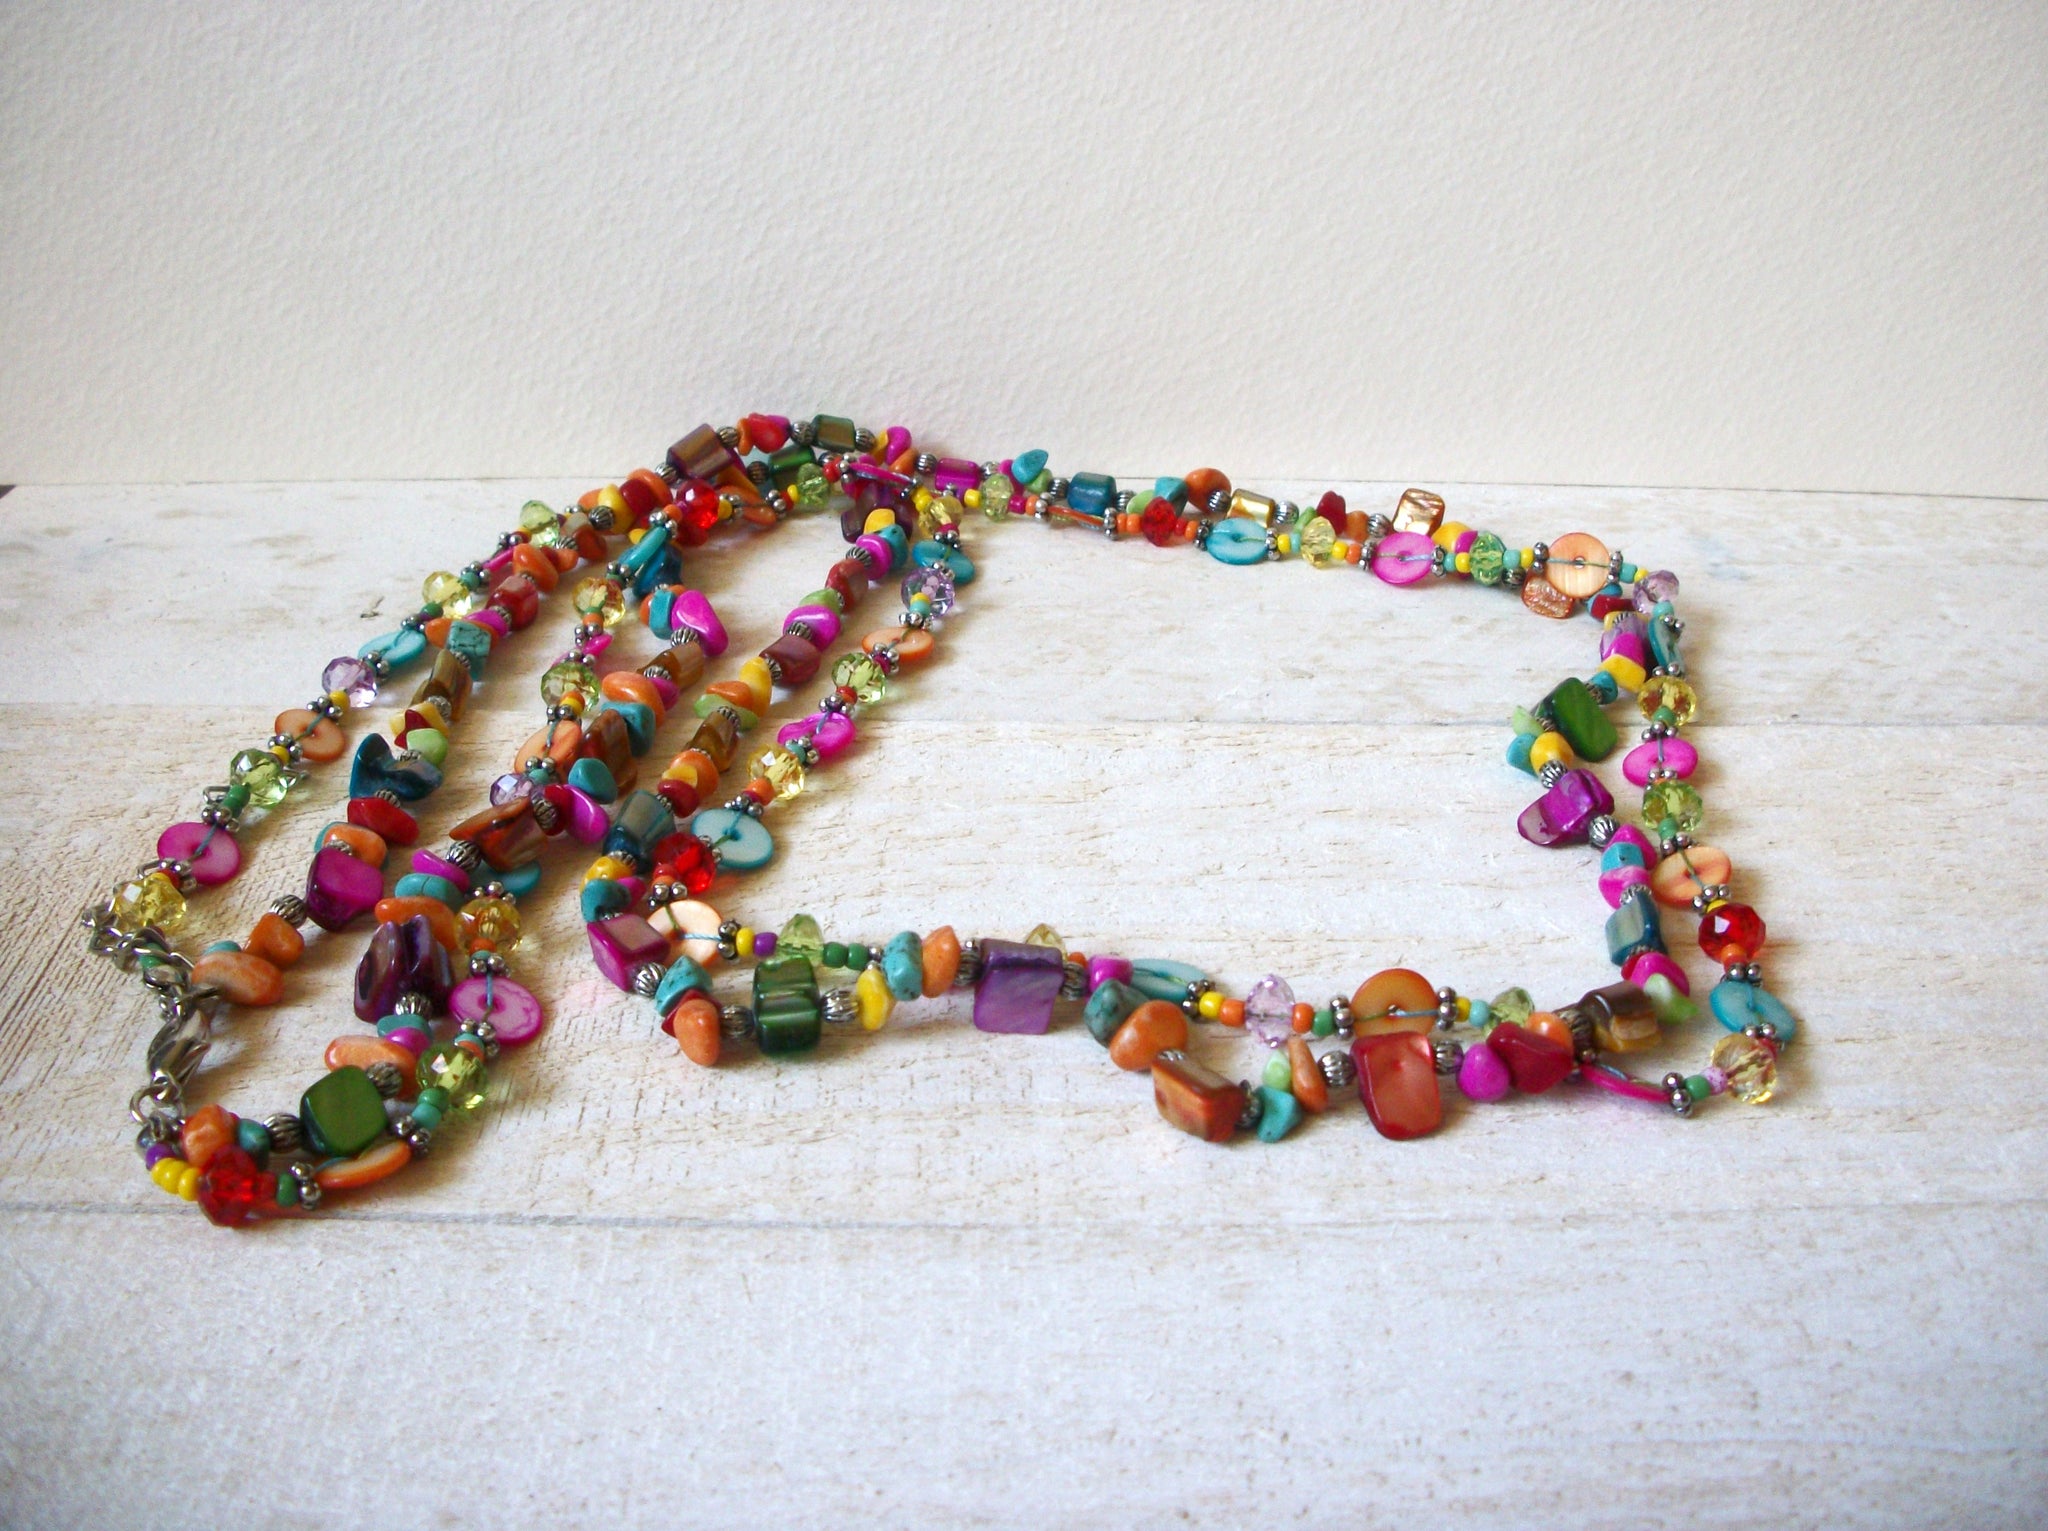 Vintage Glass Shell Colorful Necklace 62020